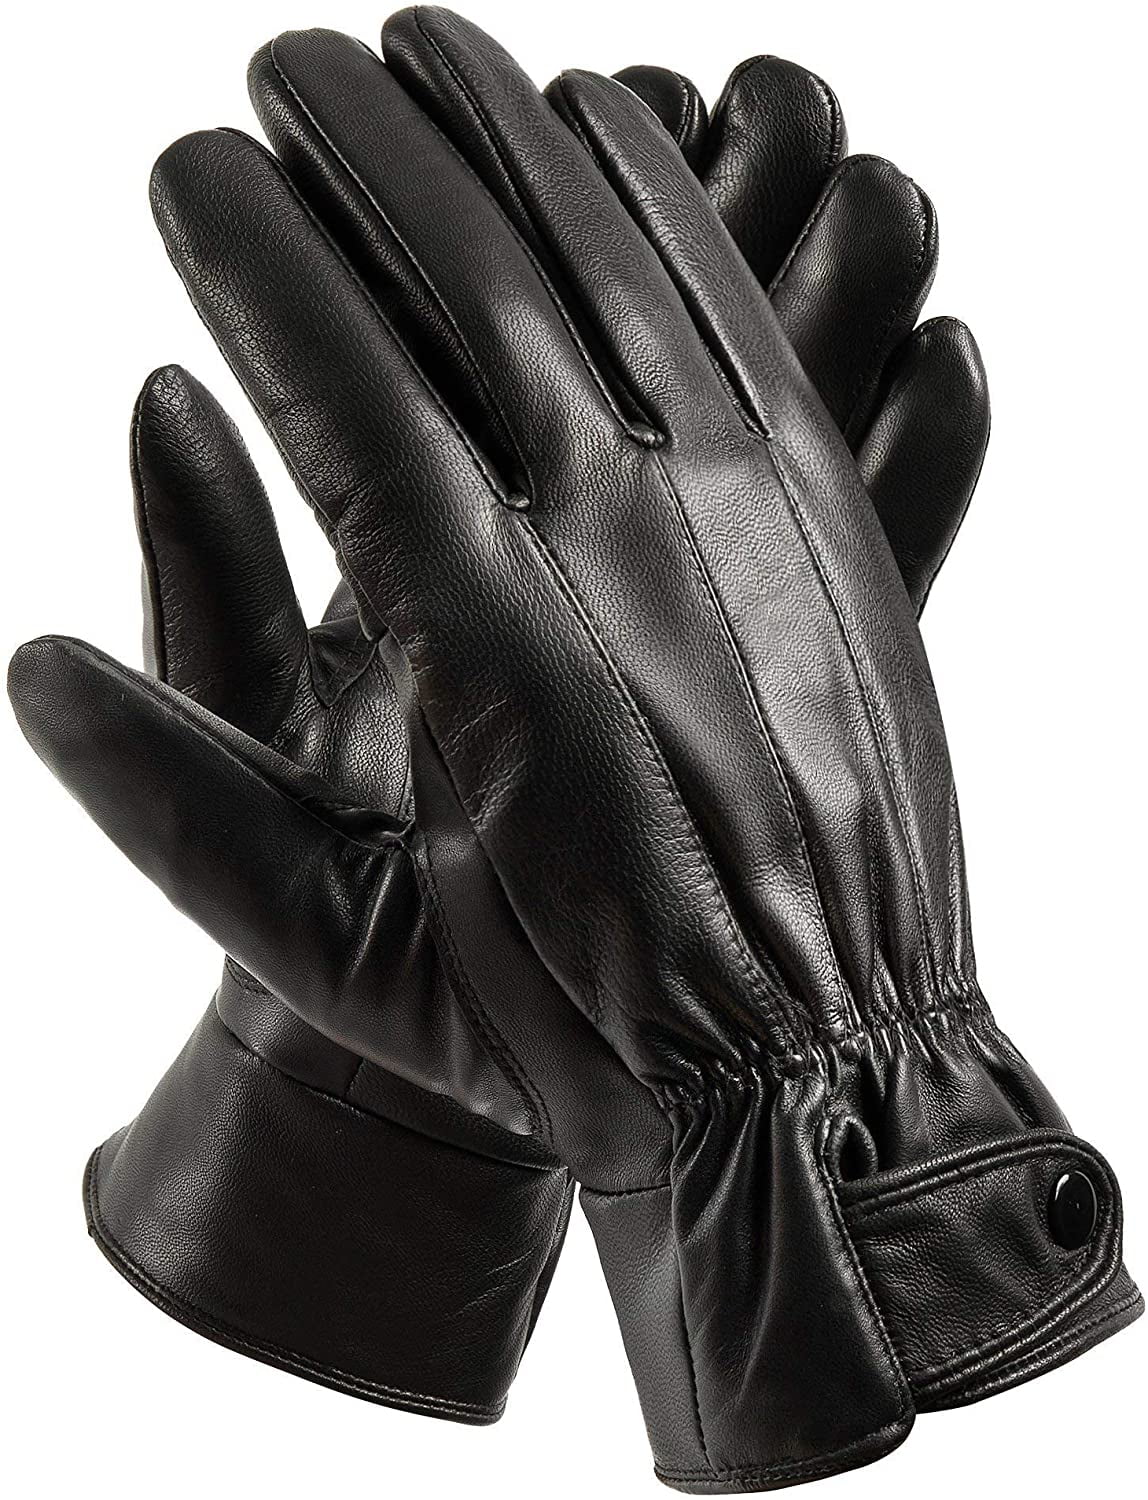 Ladies Leather Gloves Women Real Soft Fleece Lined Winter Casual Driving Warm 